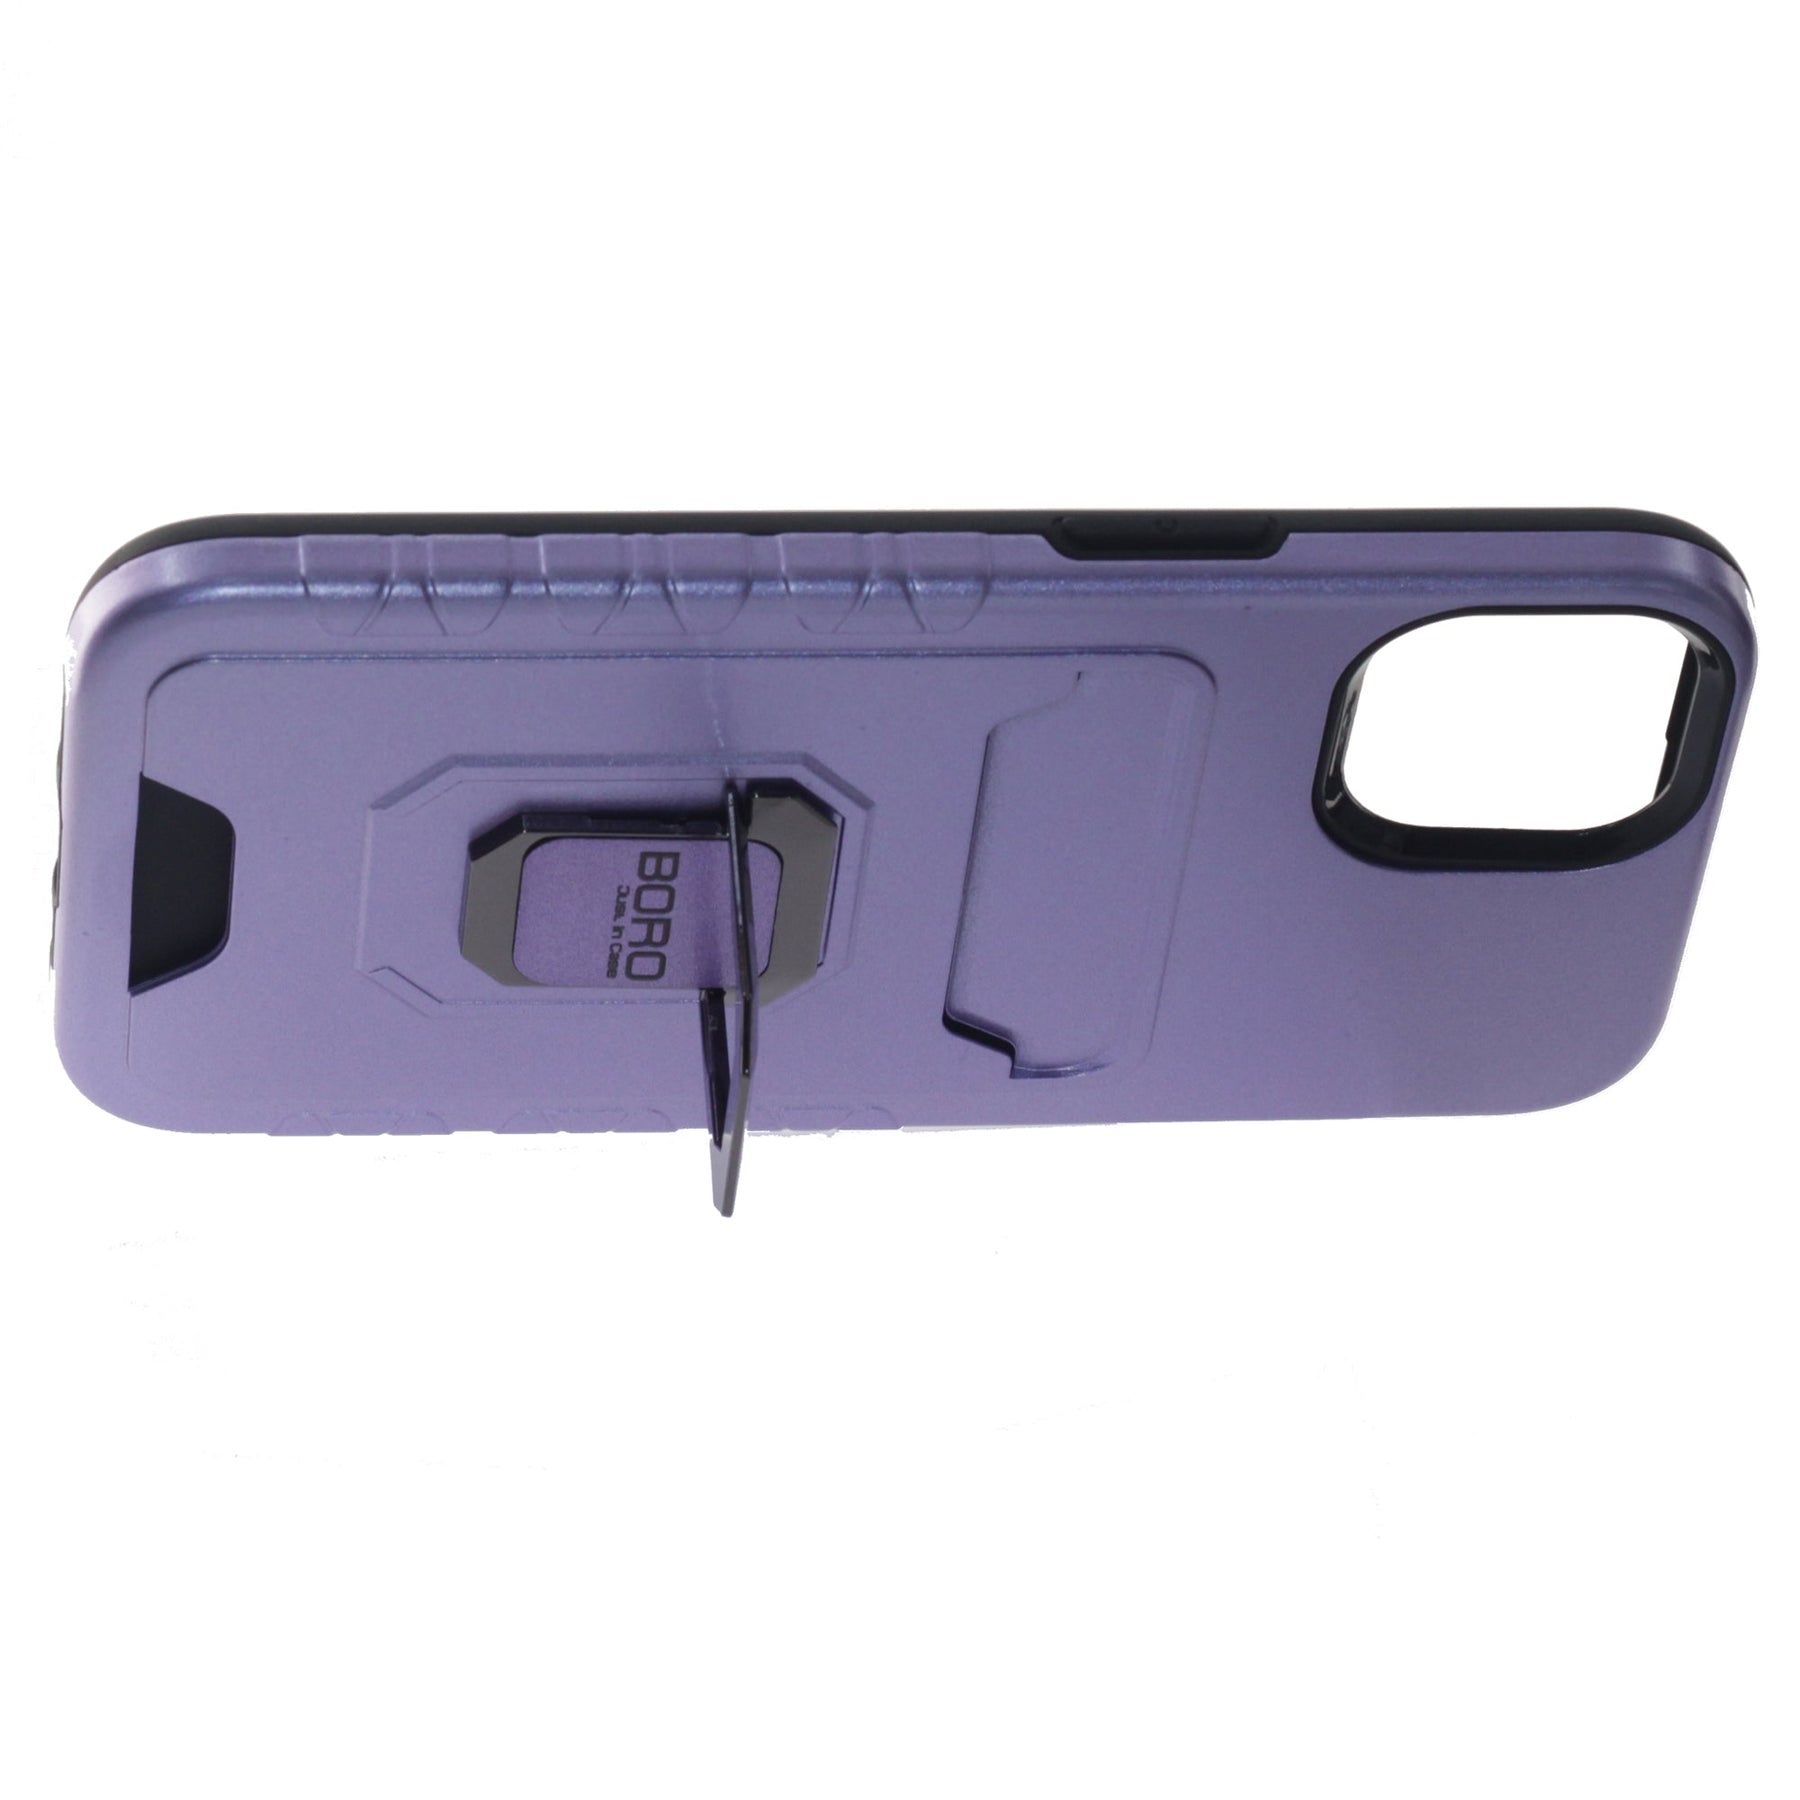 Apple iPhone 12/12 Pro, (BORO) Magnetic Ring Armor Case with Card Holder, Color Purple